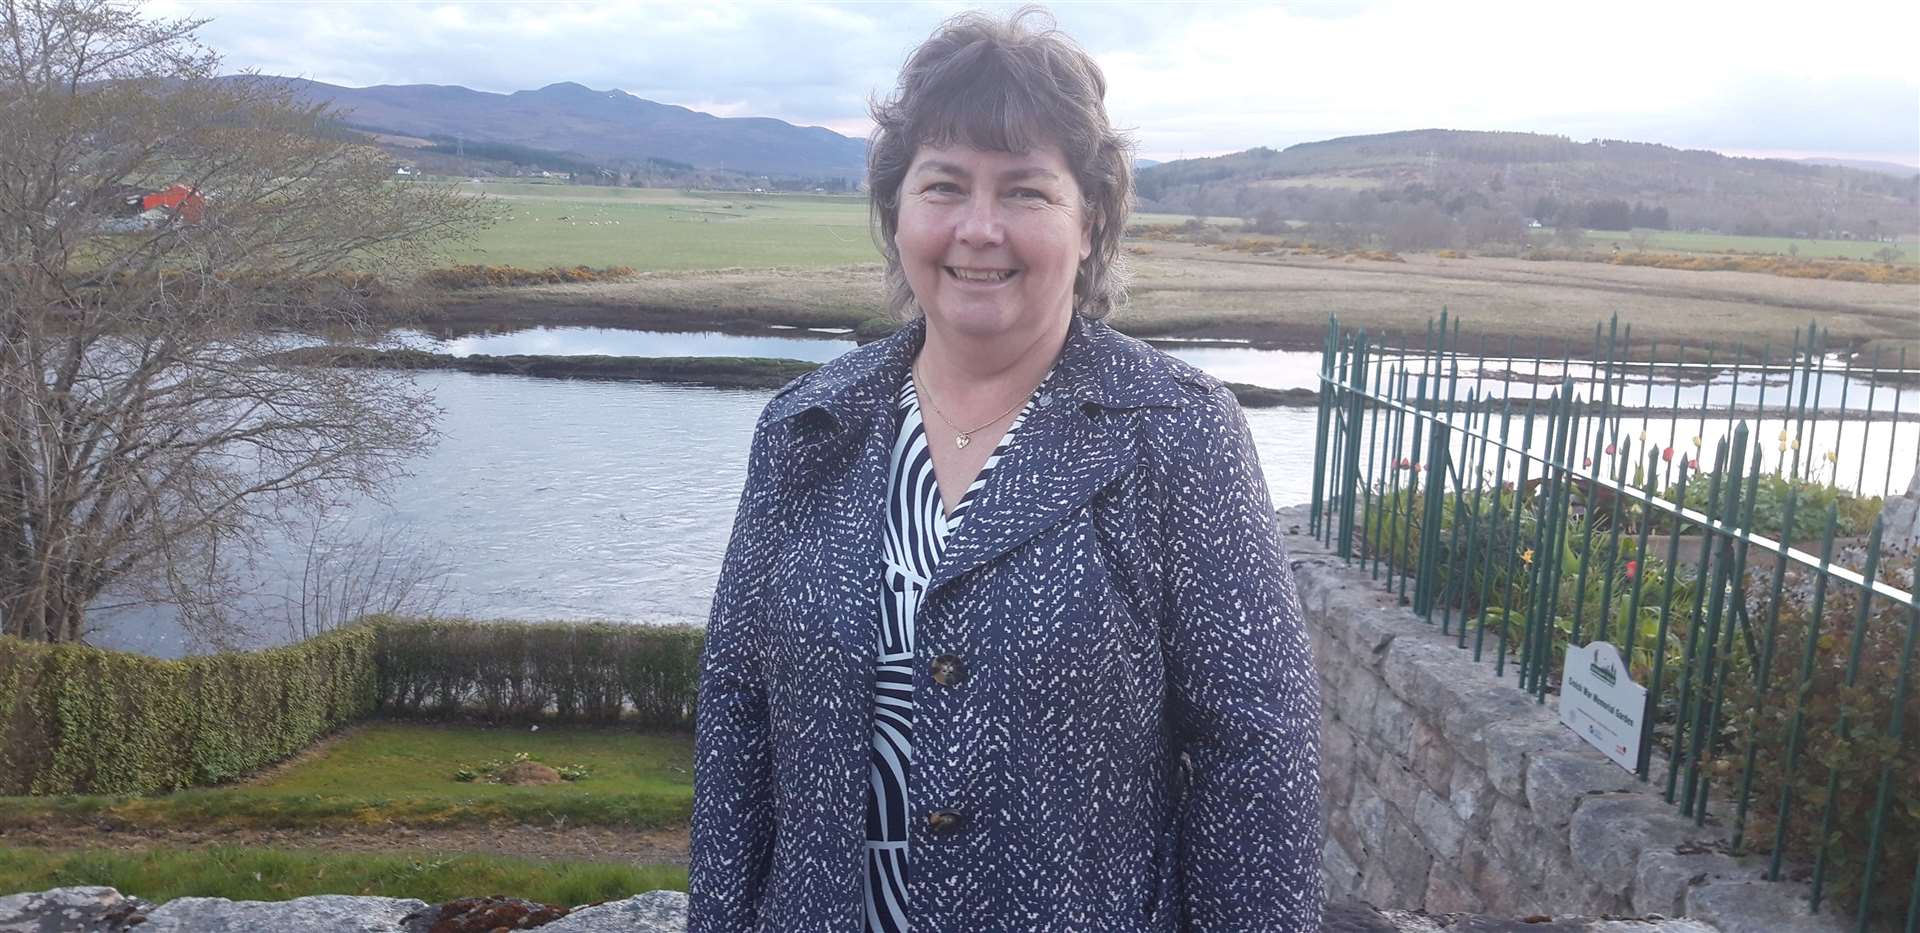 NHS Highland's Sutherland district manager Kate Kenmure says staff at Caladh Sona are "exhausted".